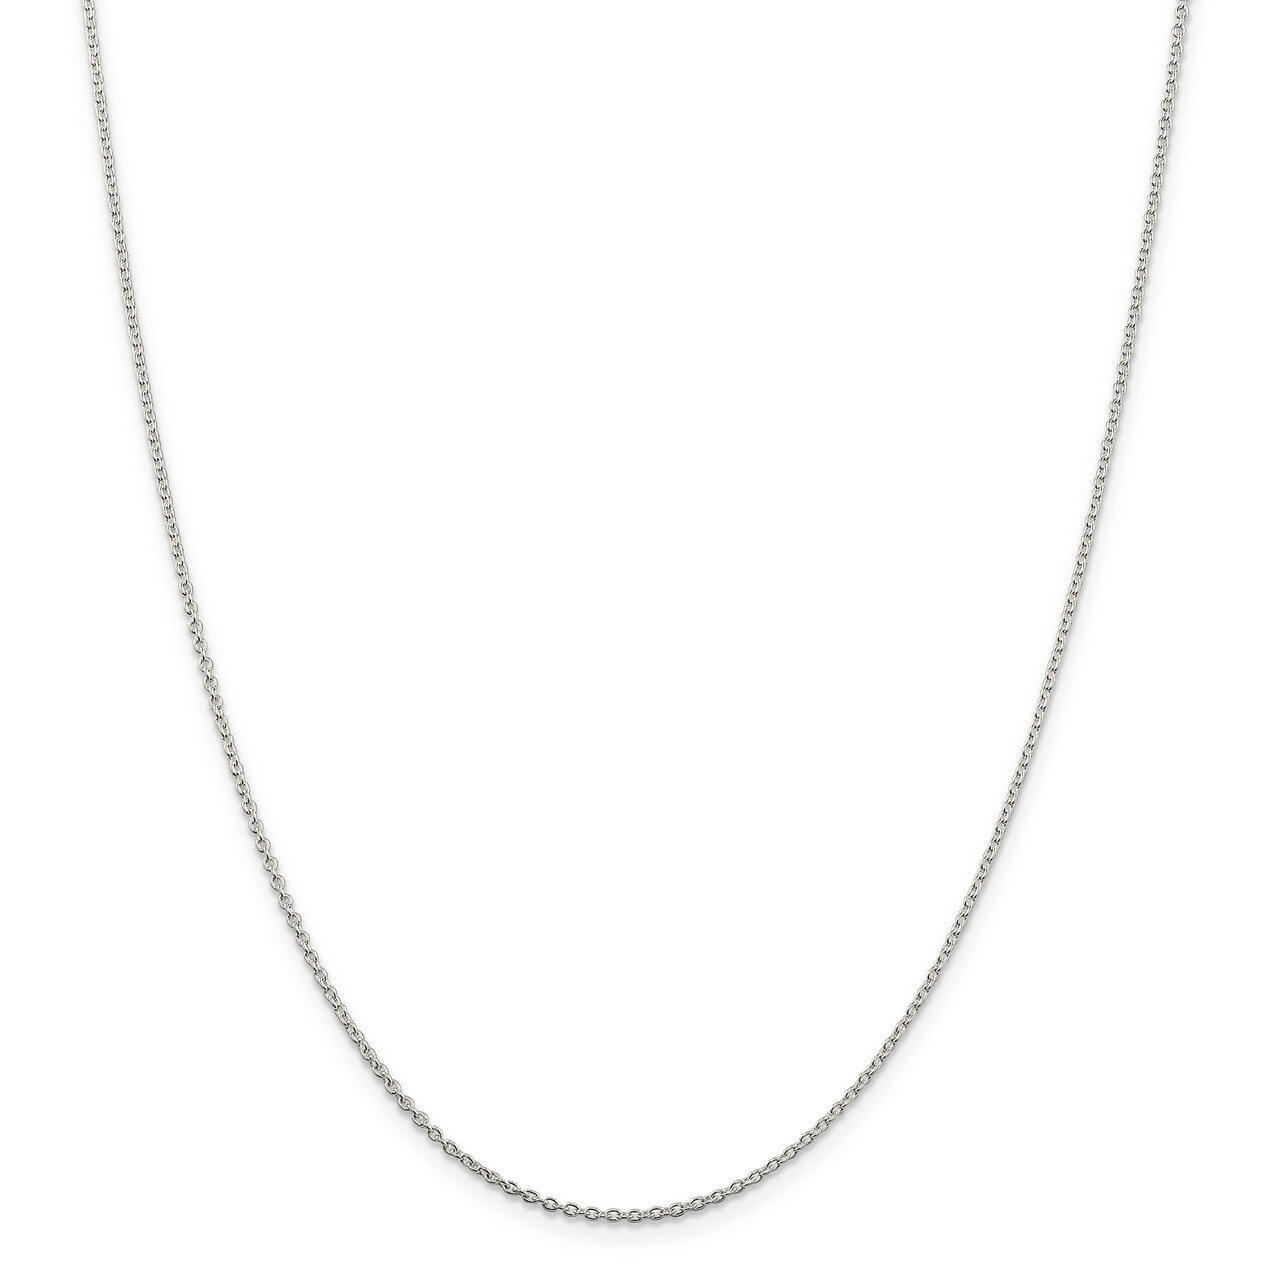 24 Inch 1.5mm Cable Chain Sterling Silver QCL040-24